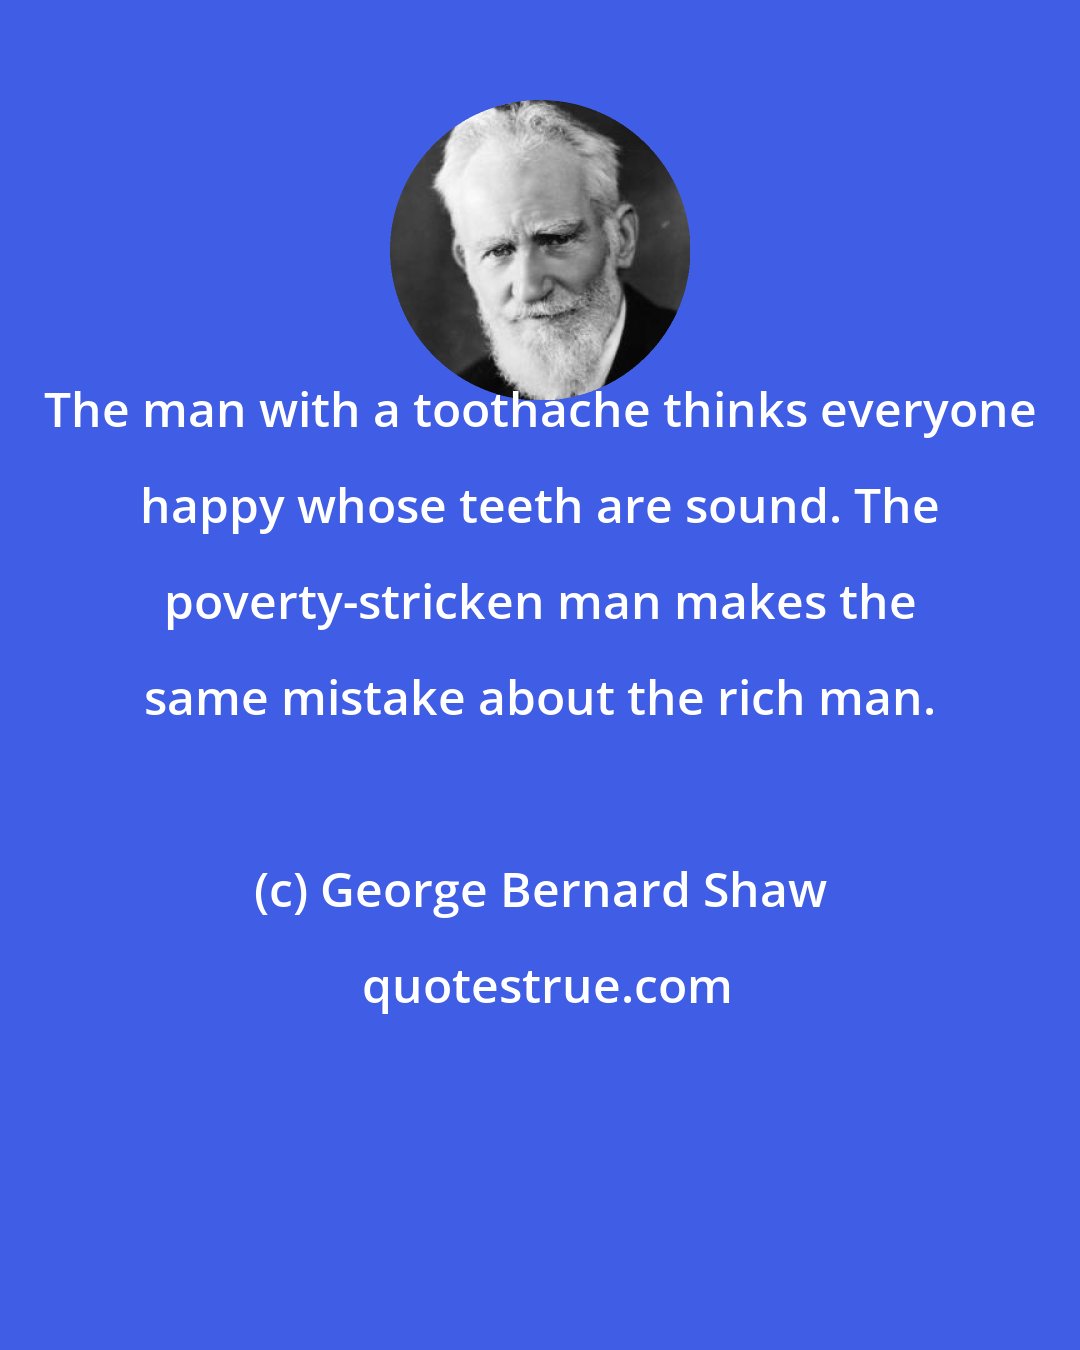 George Bernard Shaw: The man with a toothache thinks everyone happy whose teeth are sound. The poverty-stricken man makes the same mistake about the rich man.